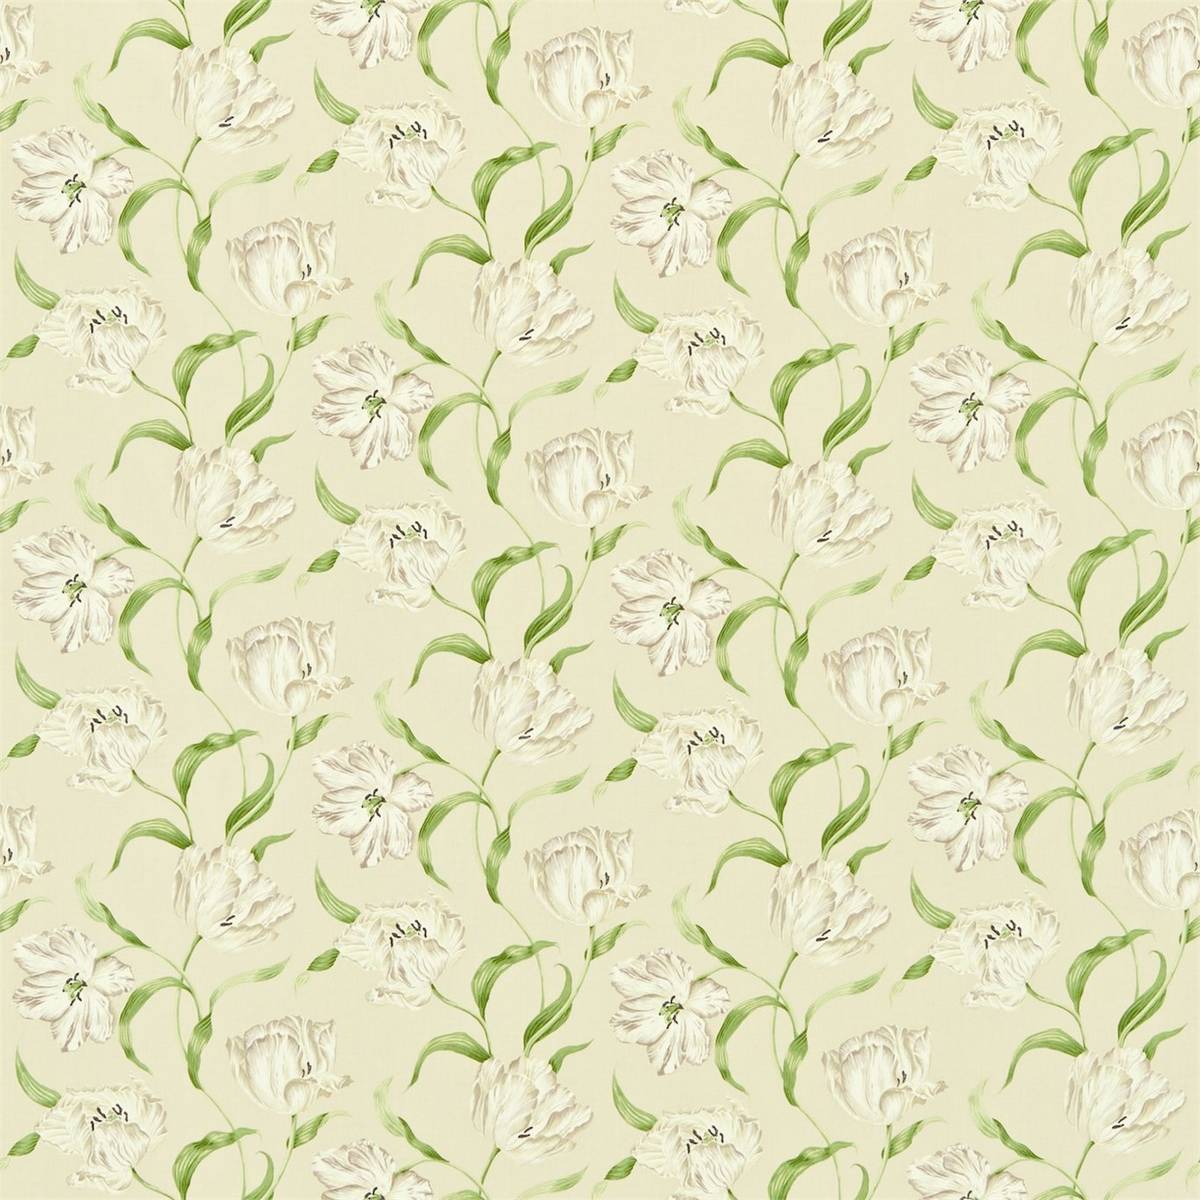 Dancing Tulips Cream/Ivory Fabric by Sanderson